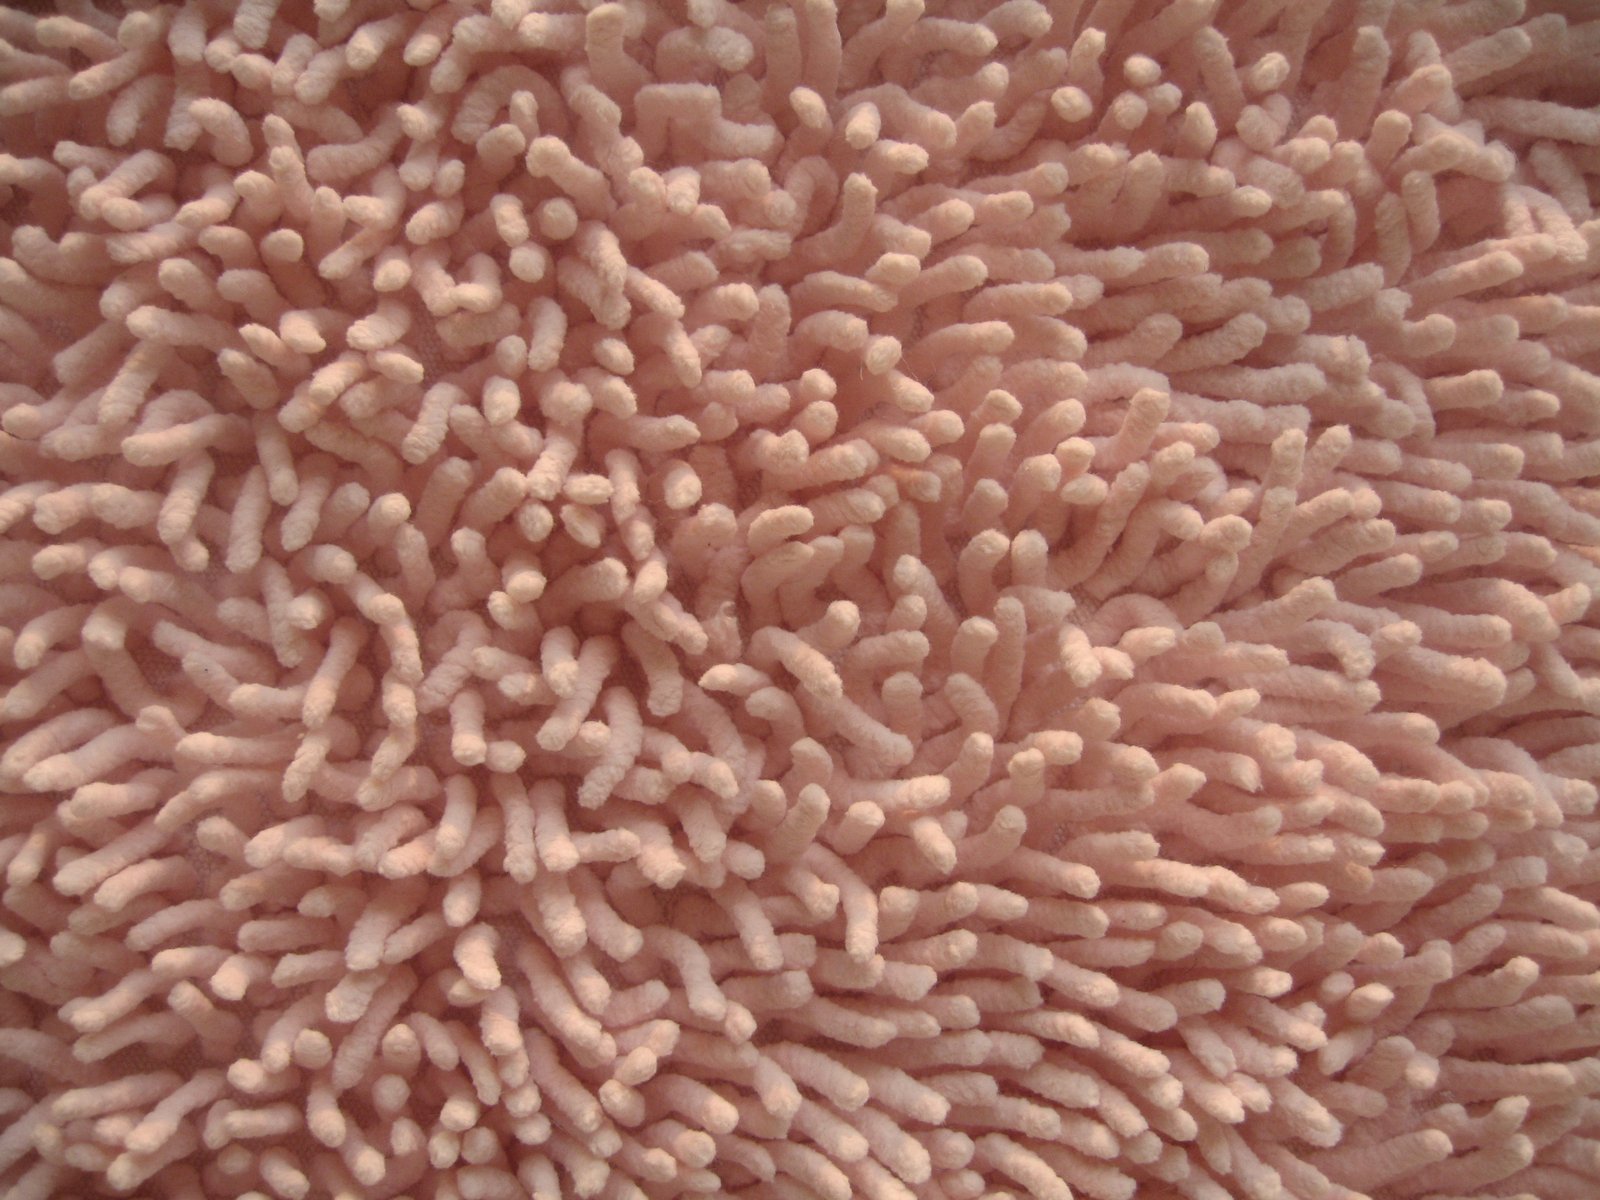 this is the corals in the ocean, with pink, white spots